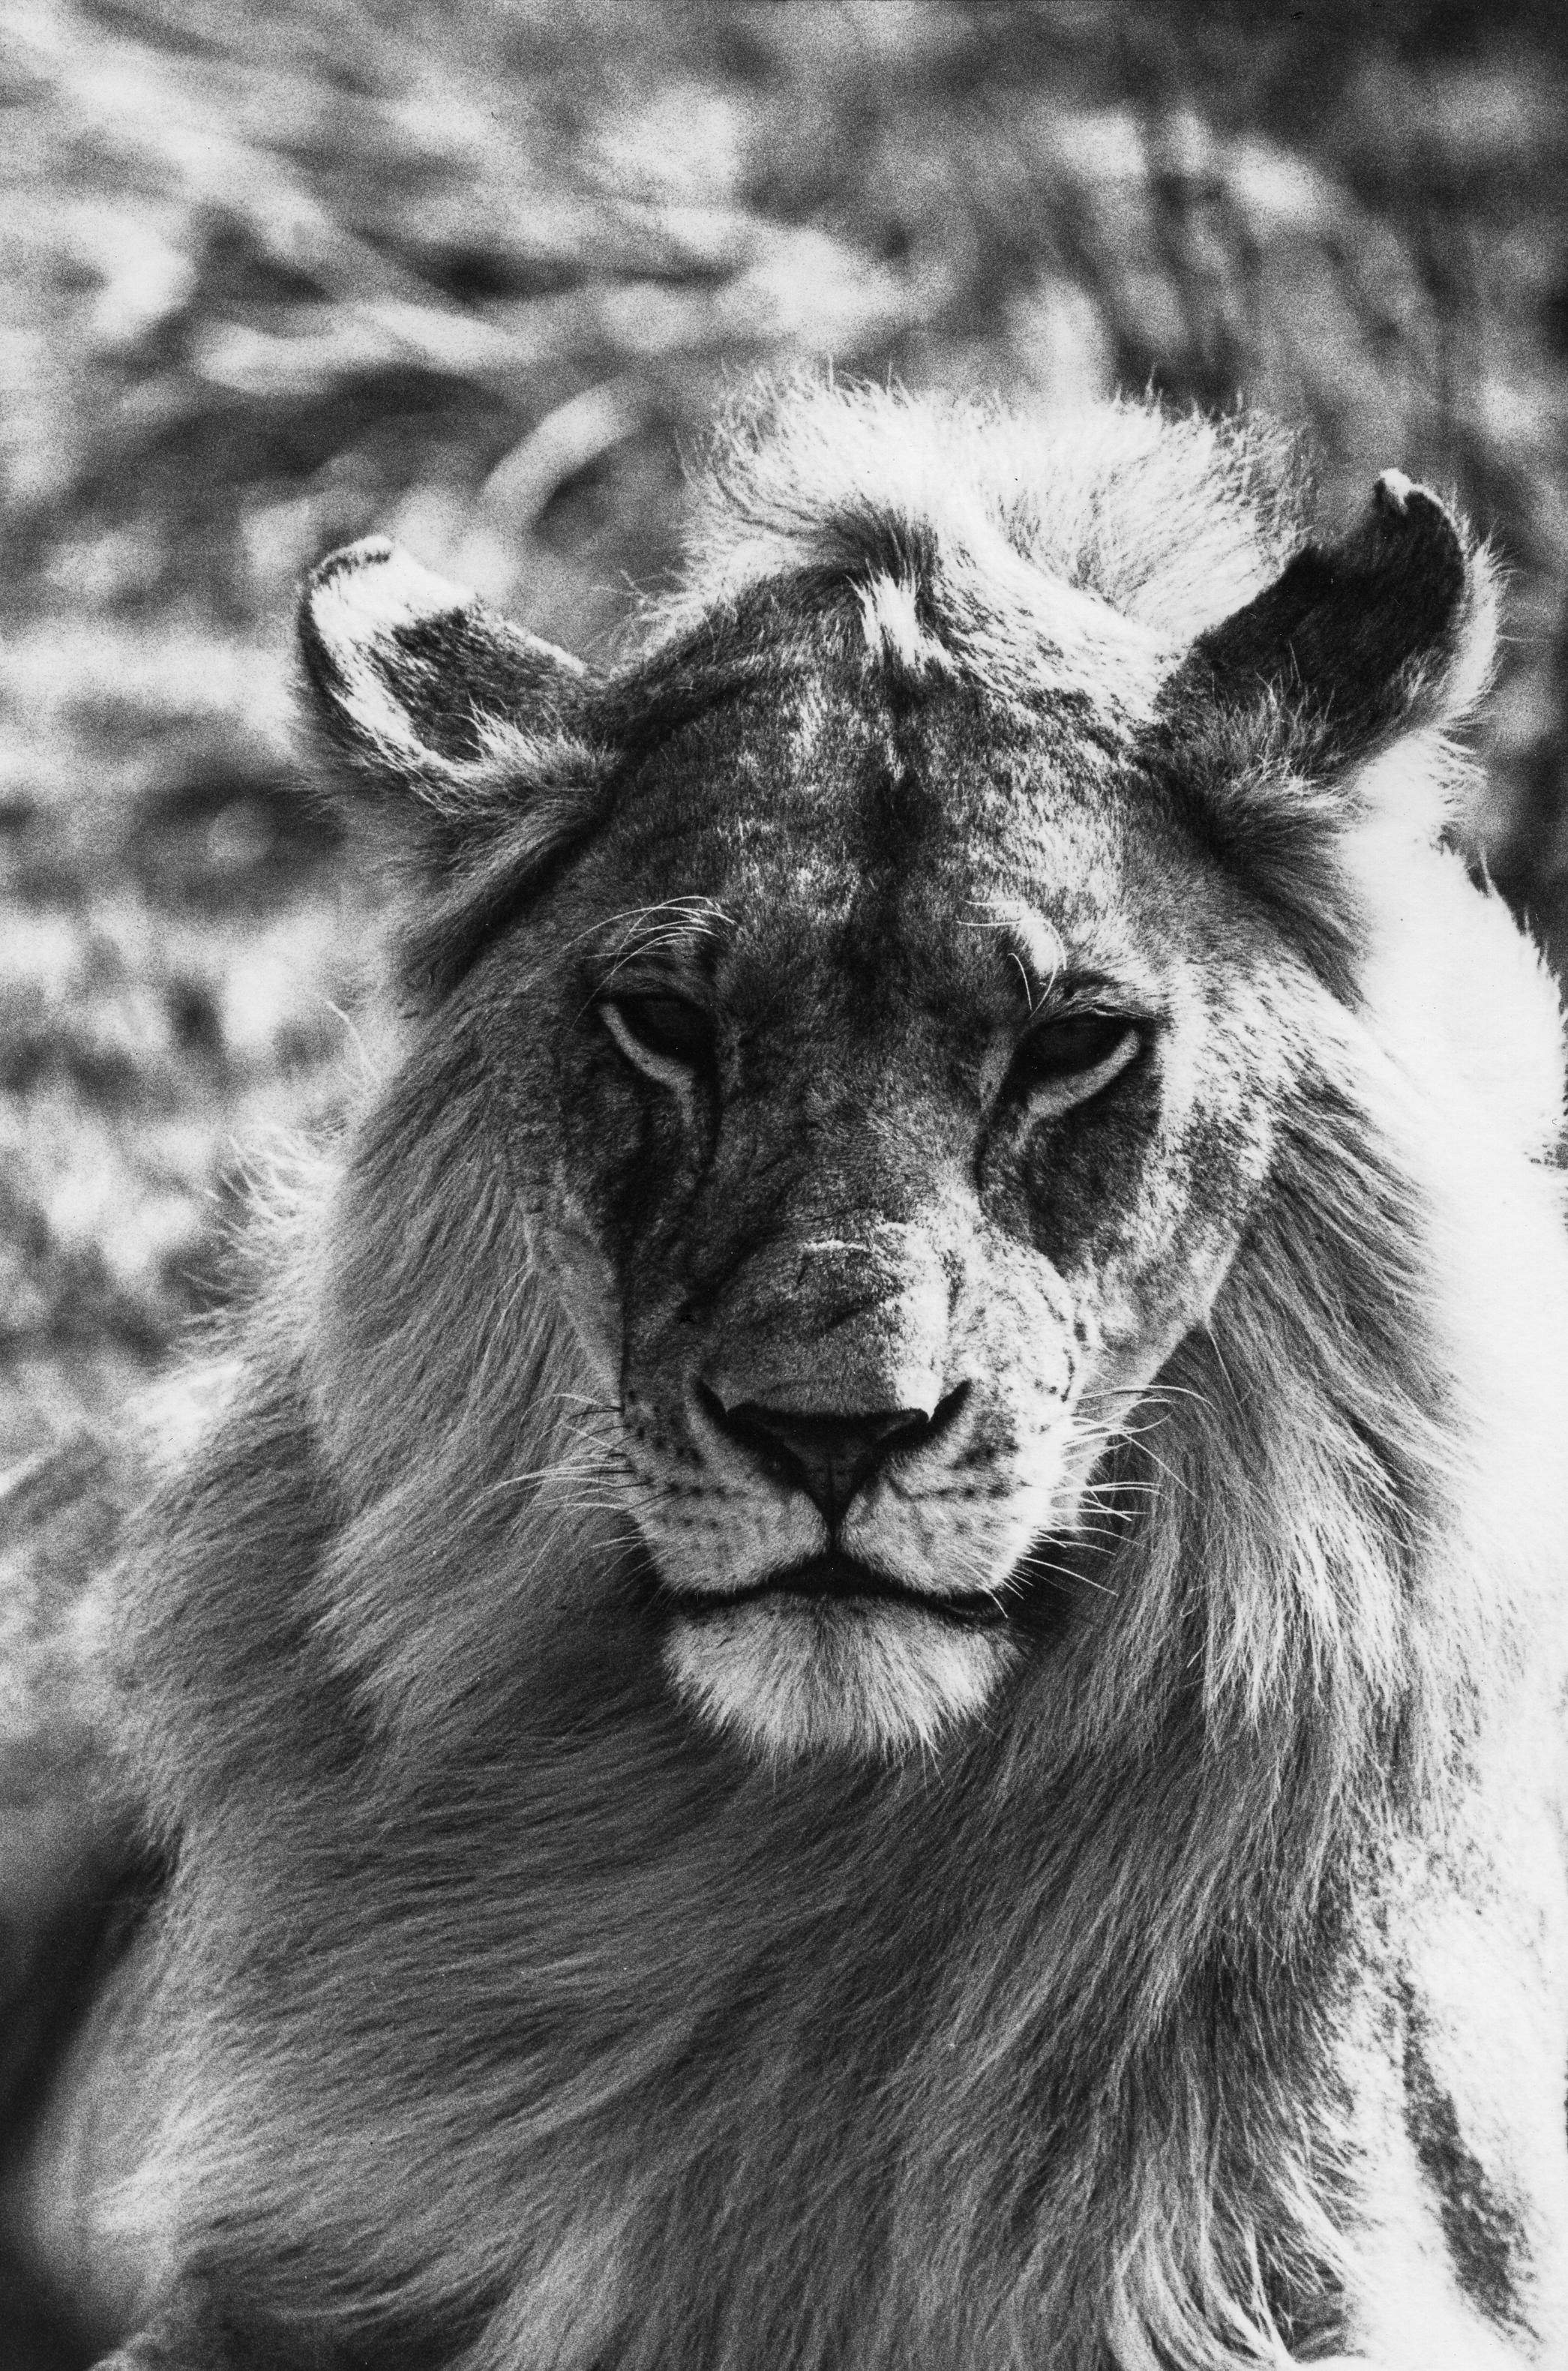 Arthur Elgort Black and White Photograph - Lion in Africa